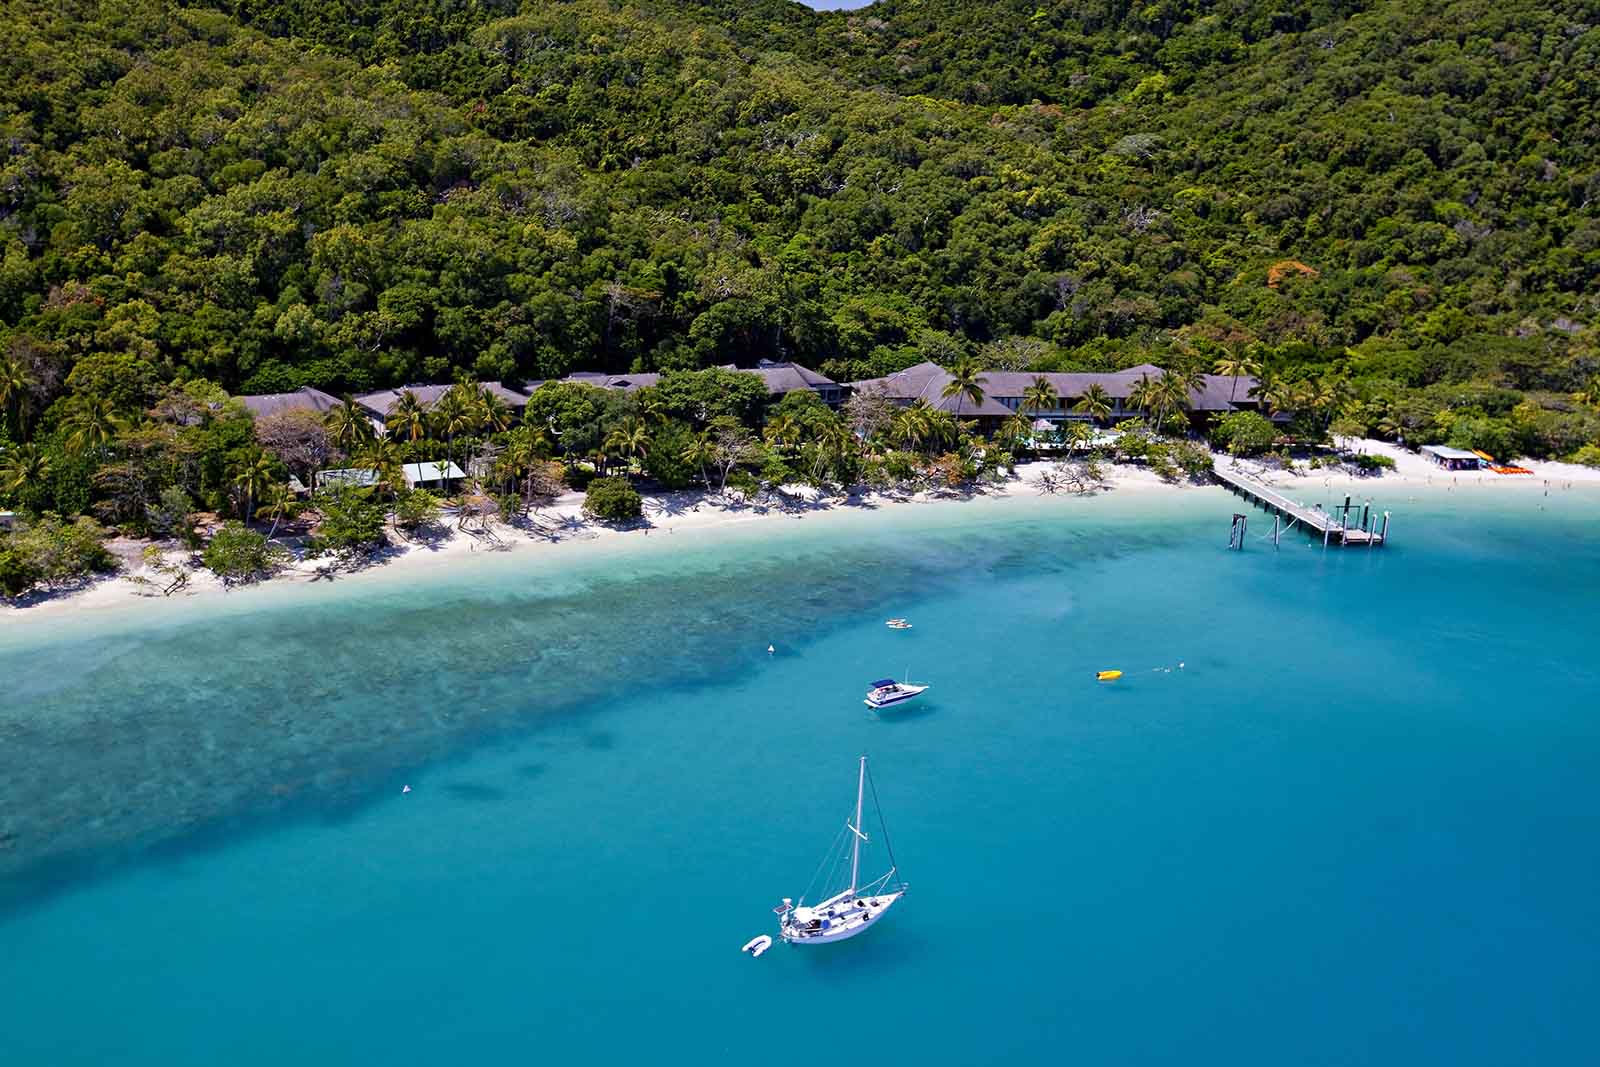 Fitzroy Island Resort, Great Barrier Reef, Queensland | The trees helping to save the reef